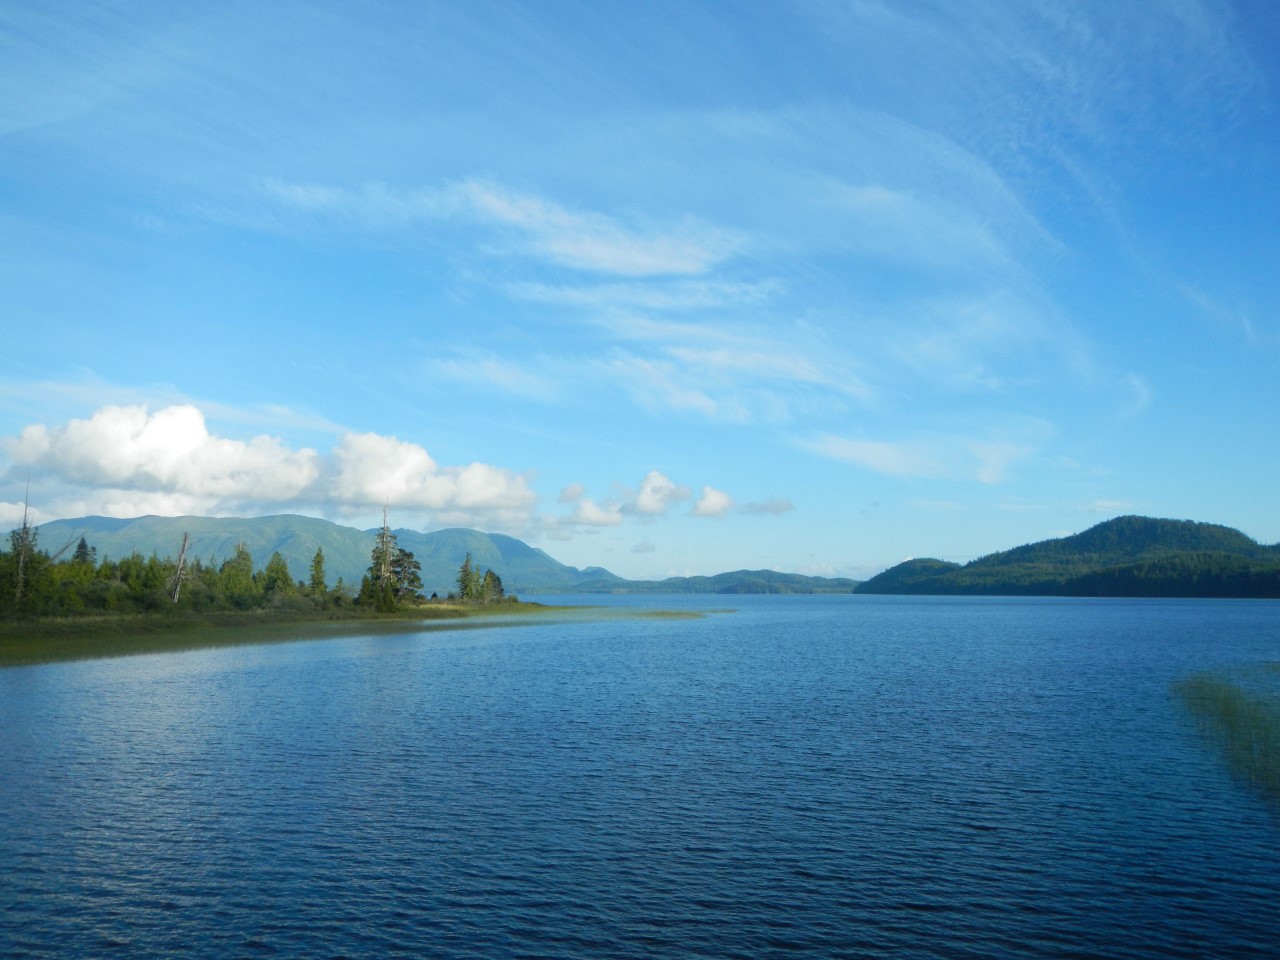 Beautiful lake with evergreens and green mountains in the distance under a blue sky.